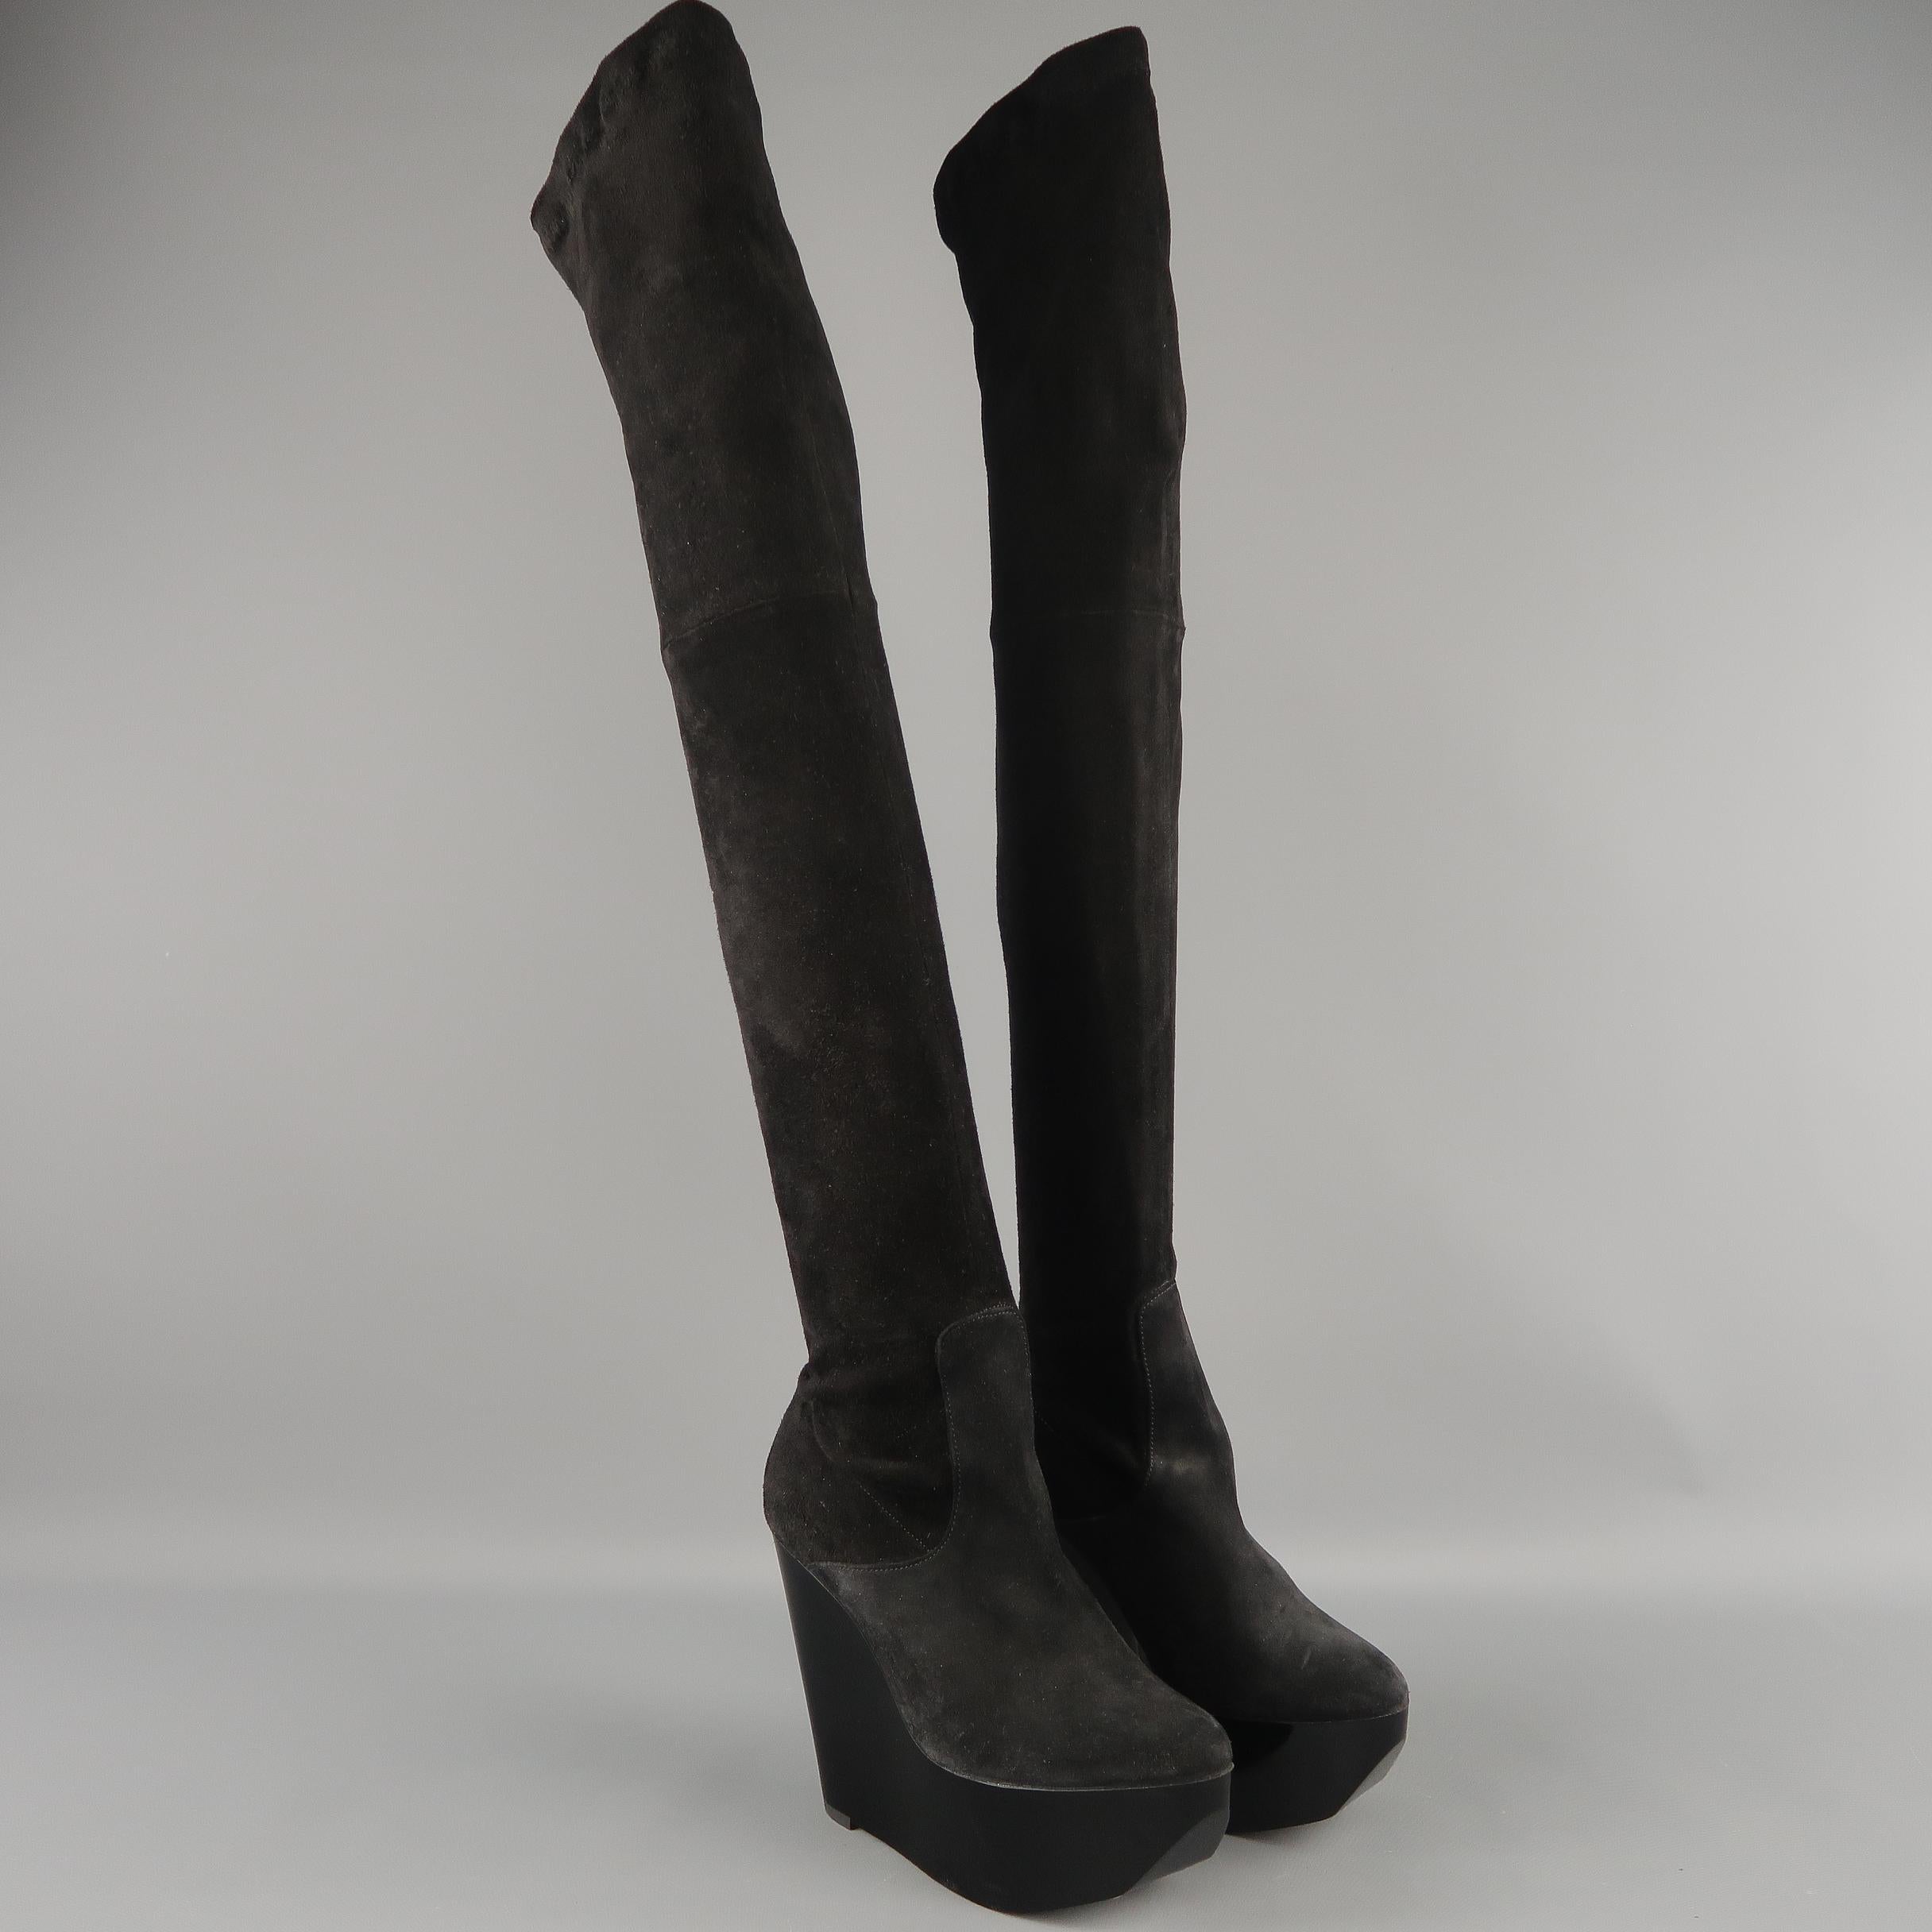 These fabulous ROBERT CLERGERIE thigh high boots come in black stretch bonded suede with a rounded point toe and angular lacquered platform wedge. Made in France.
 
Good Pre-Owned Condition. Retails: $795.00.
Marked: 5
 
Measurements:
 
Heel: 4.5